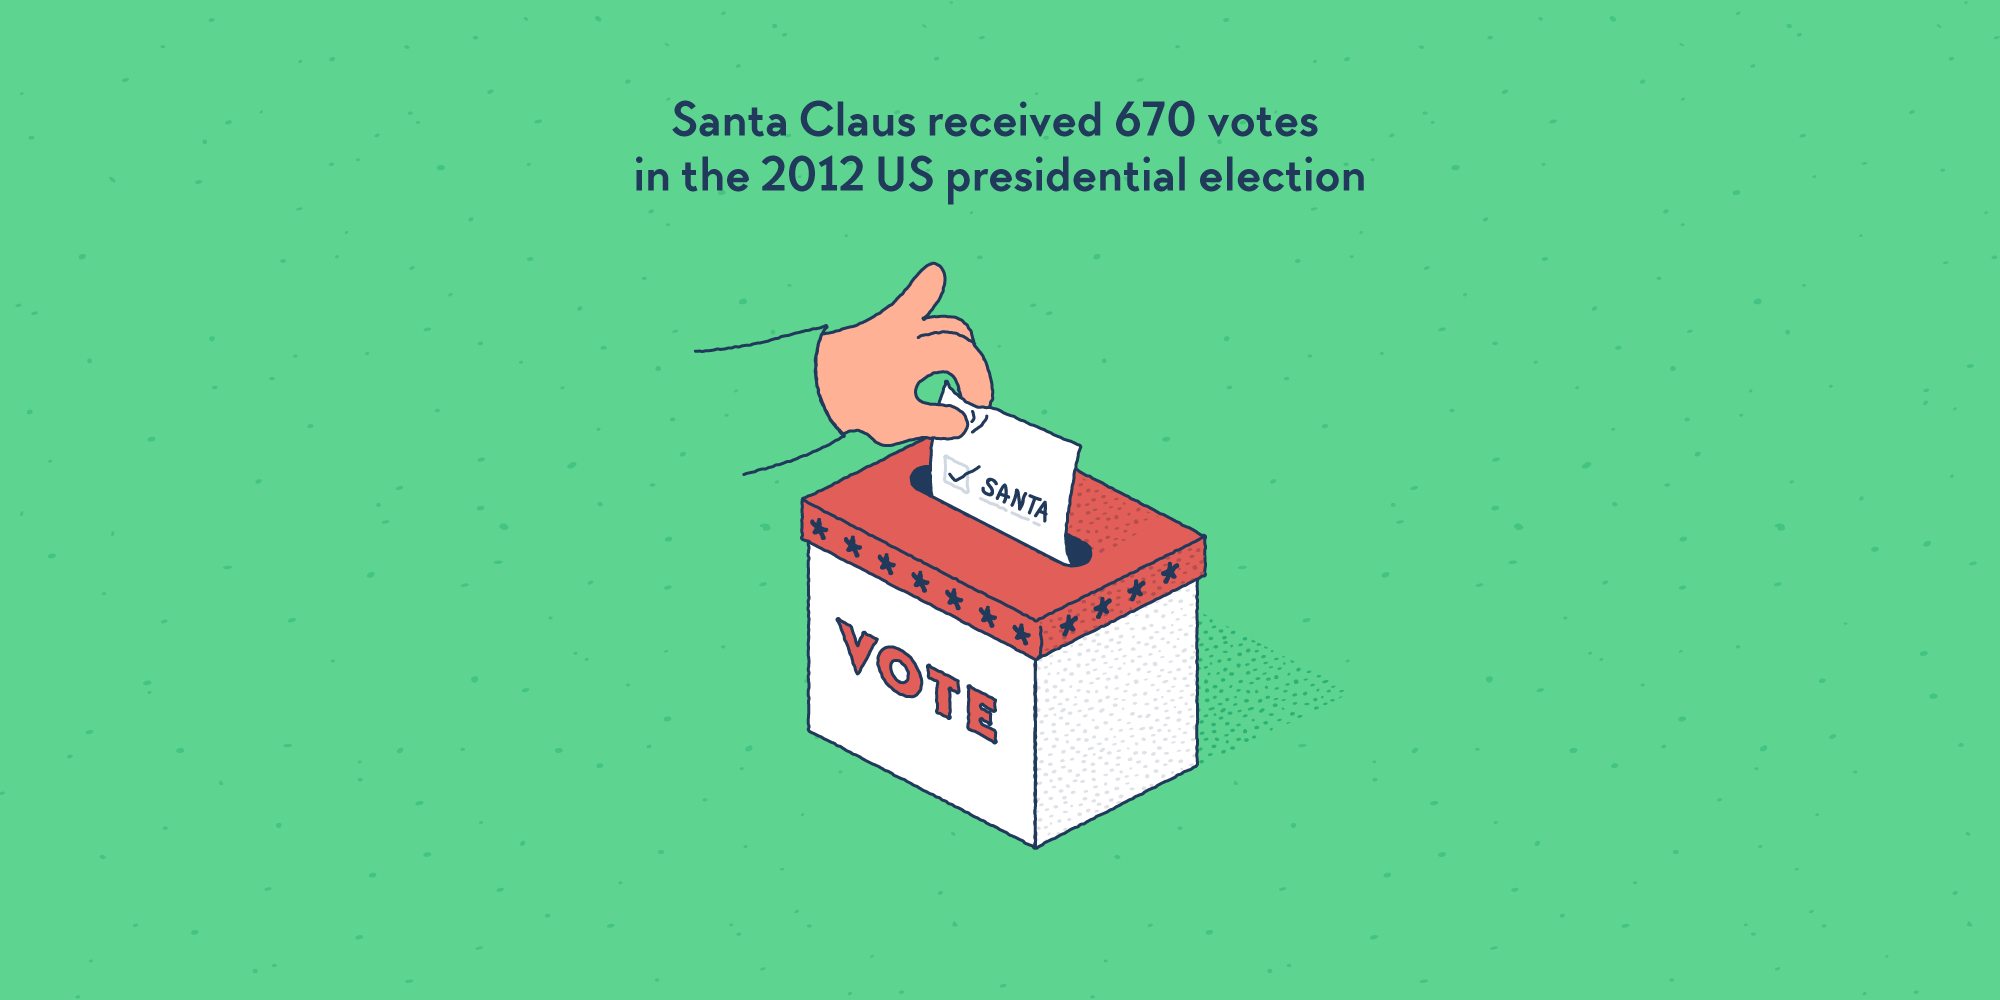 A hand putting a note with Santa's name in a ballot box